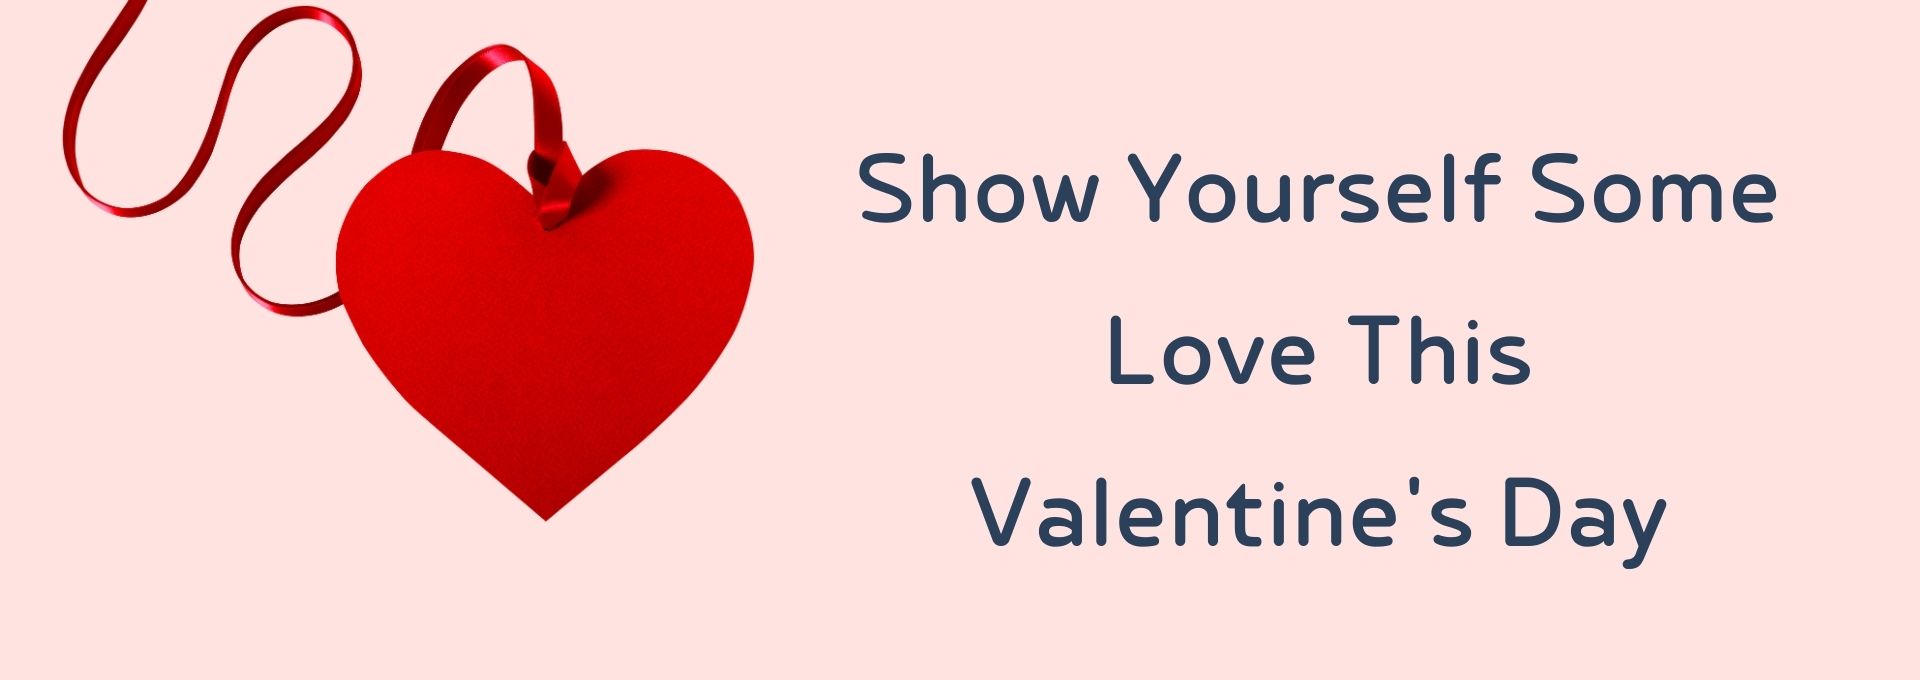 Show Yourself Some Love This Valentines Day, McGills Hairdressing Salon in Edinburgh